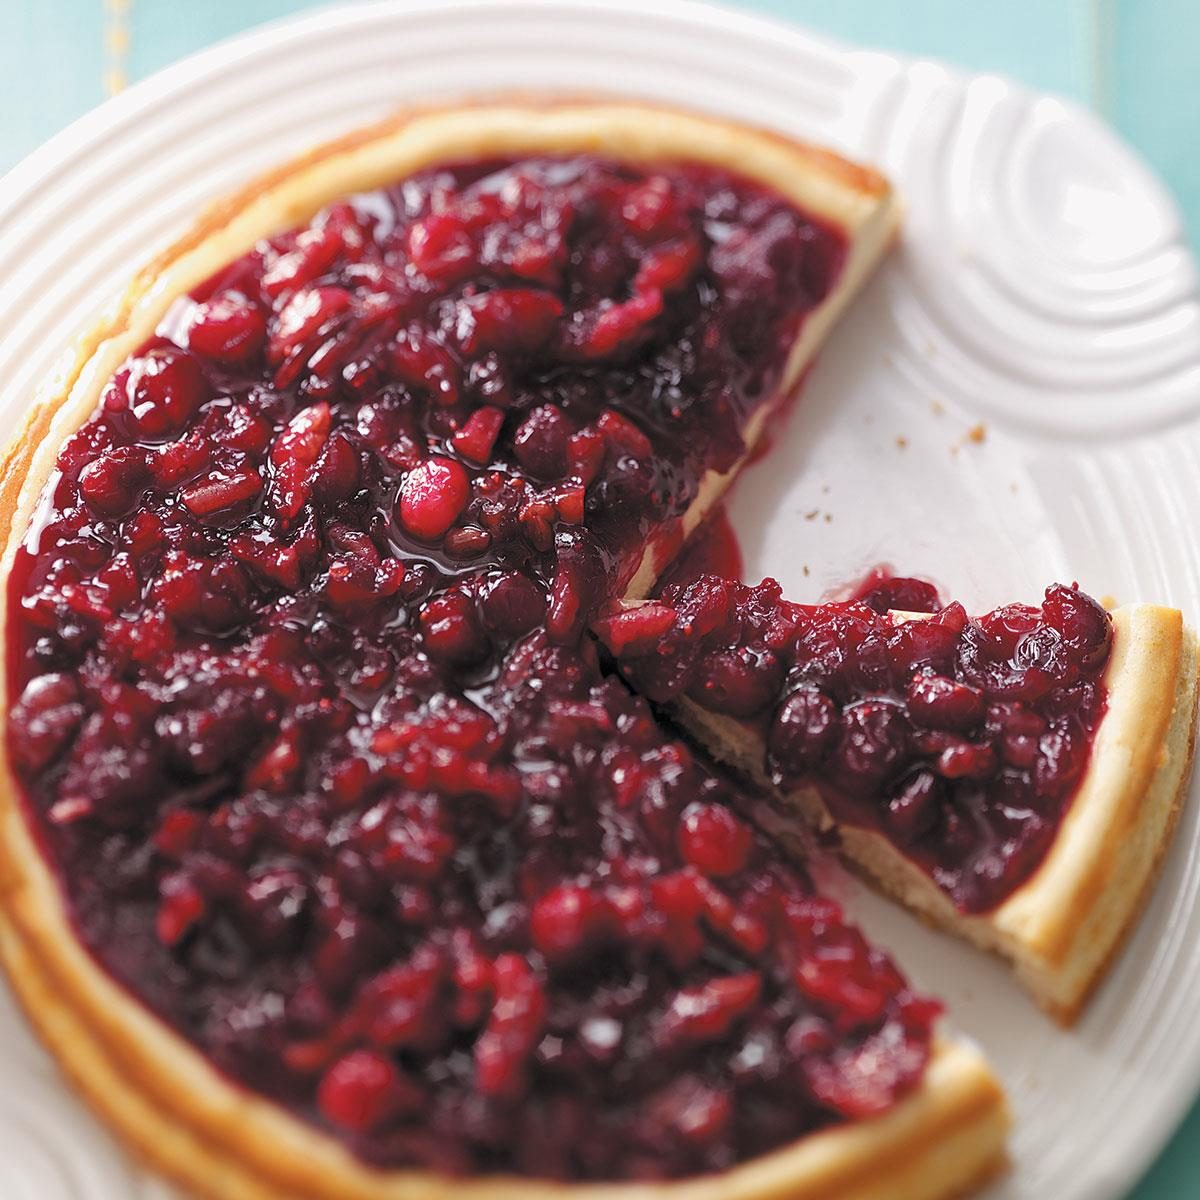 Festive Cranberry-Topped Cheesecake Recipe: How to Make It